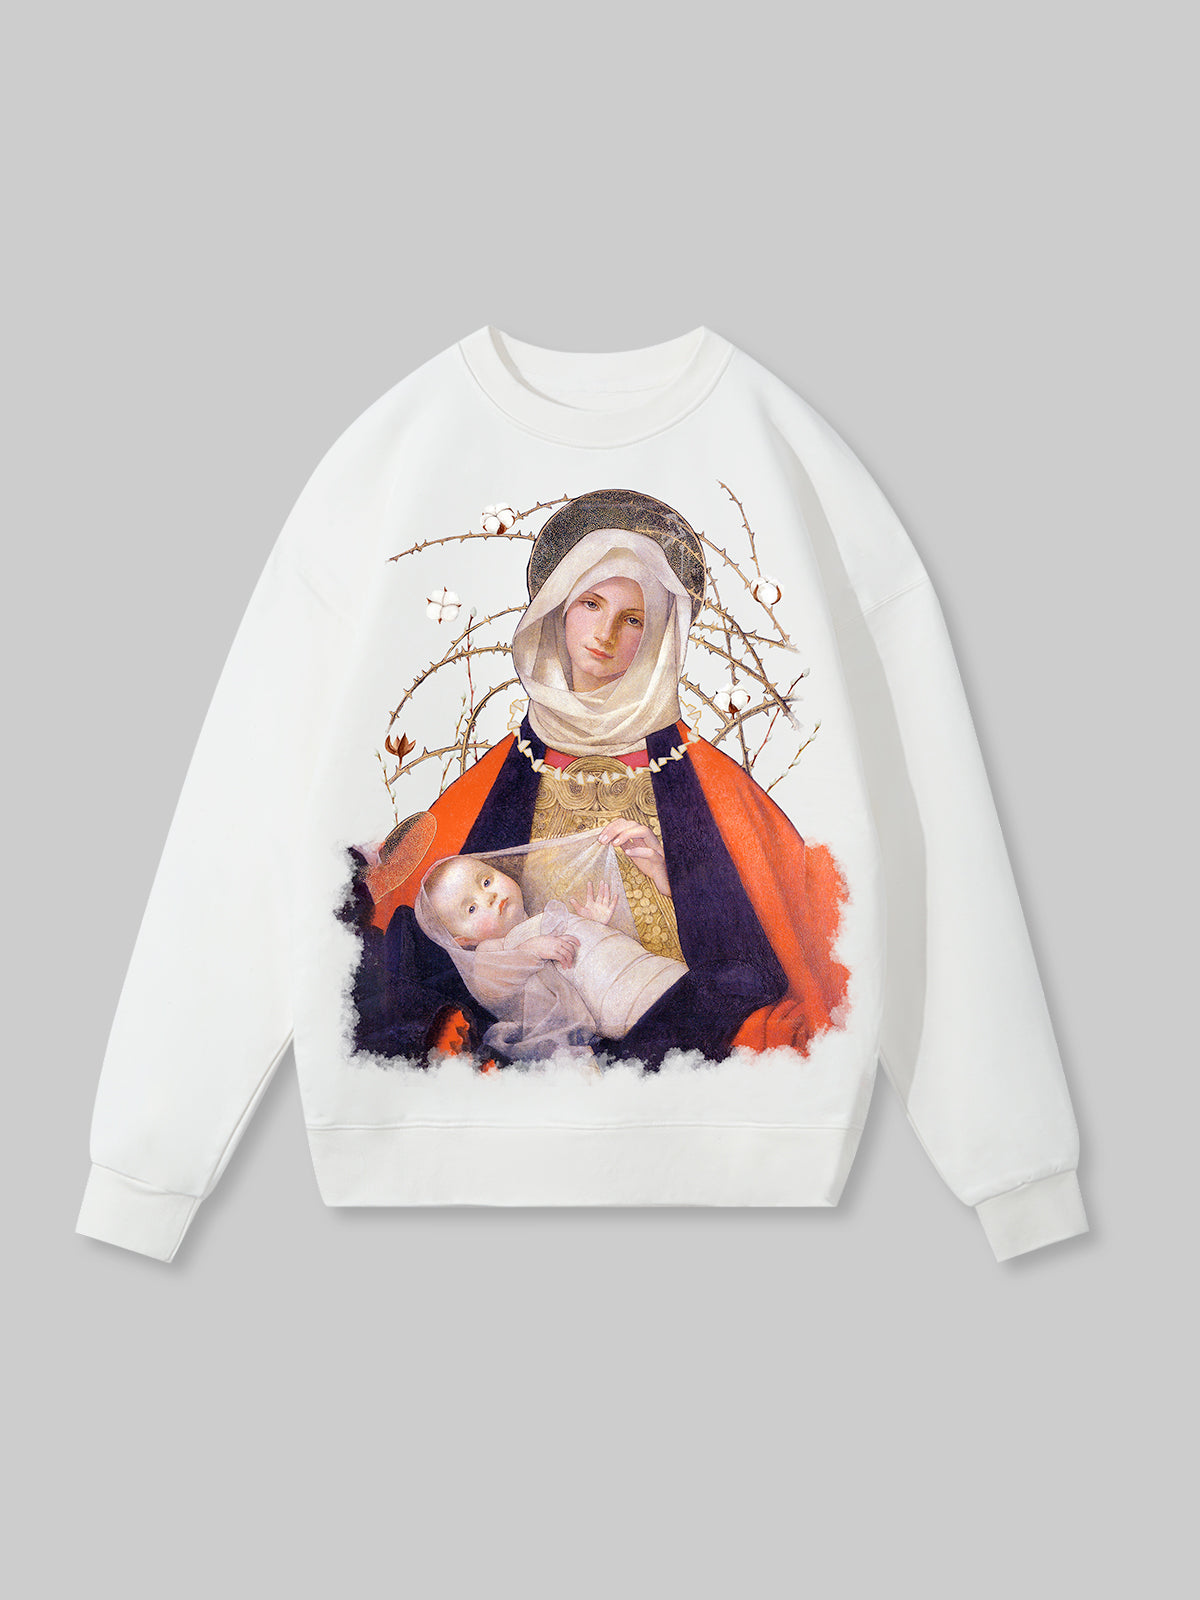 OBSTACLES & DANGERS© Artistic Black Madonna and Child Sweatshirt